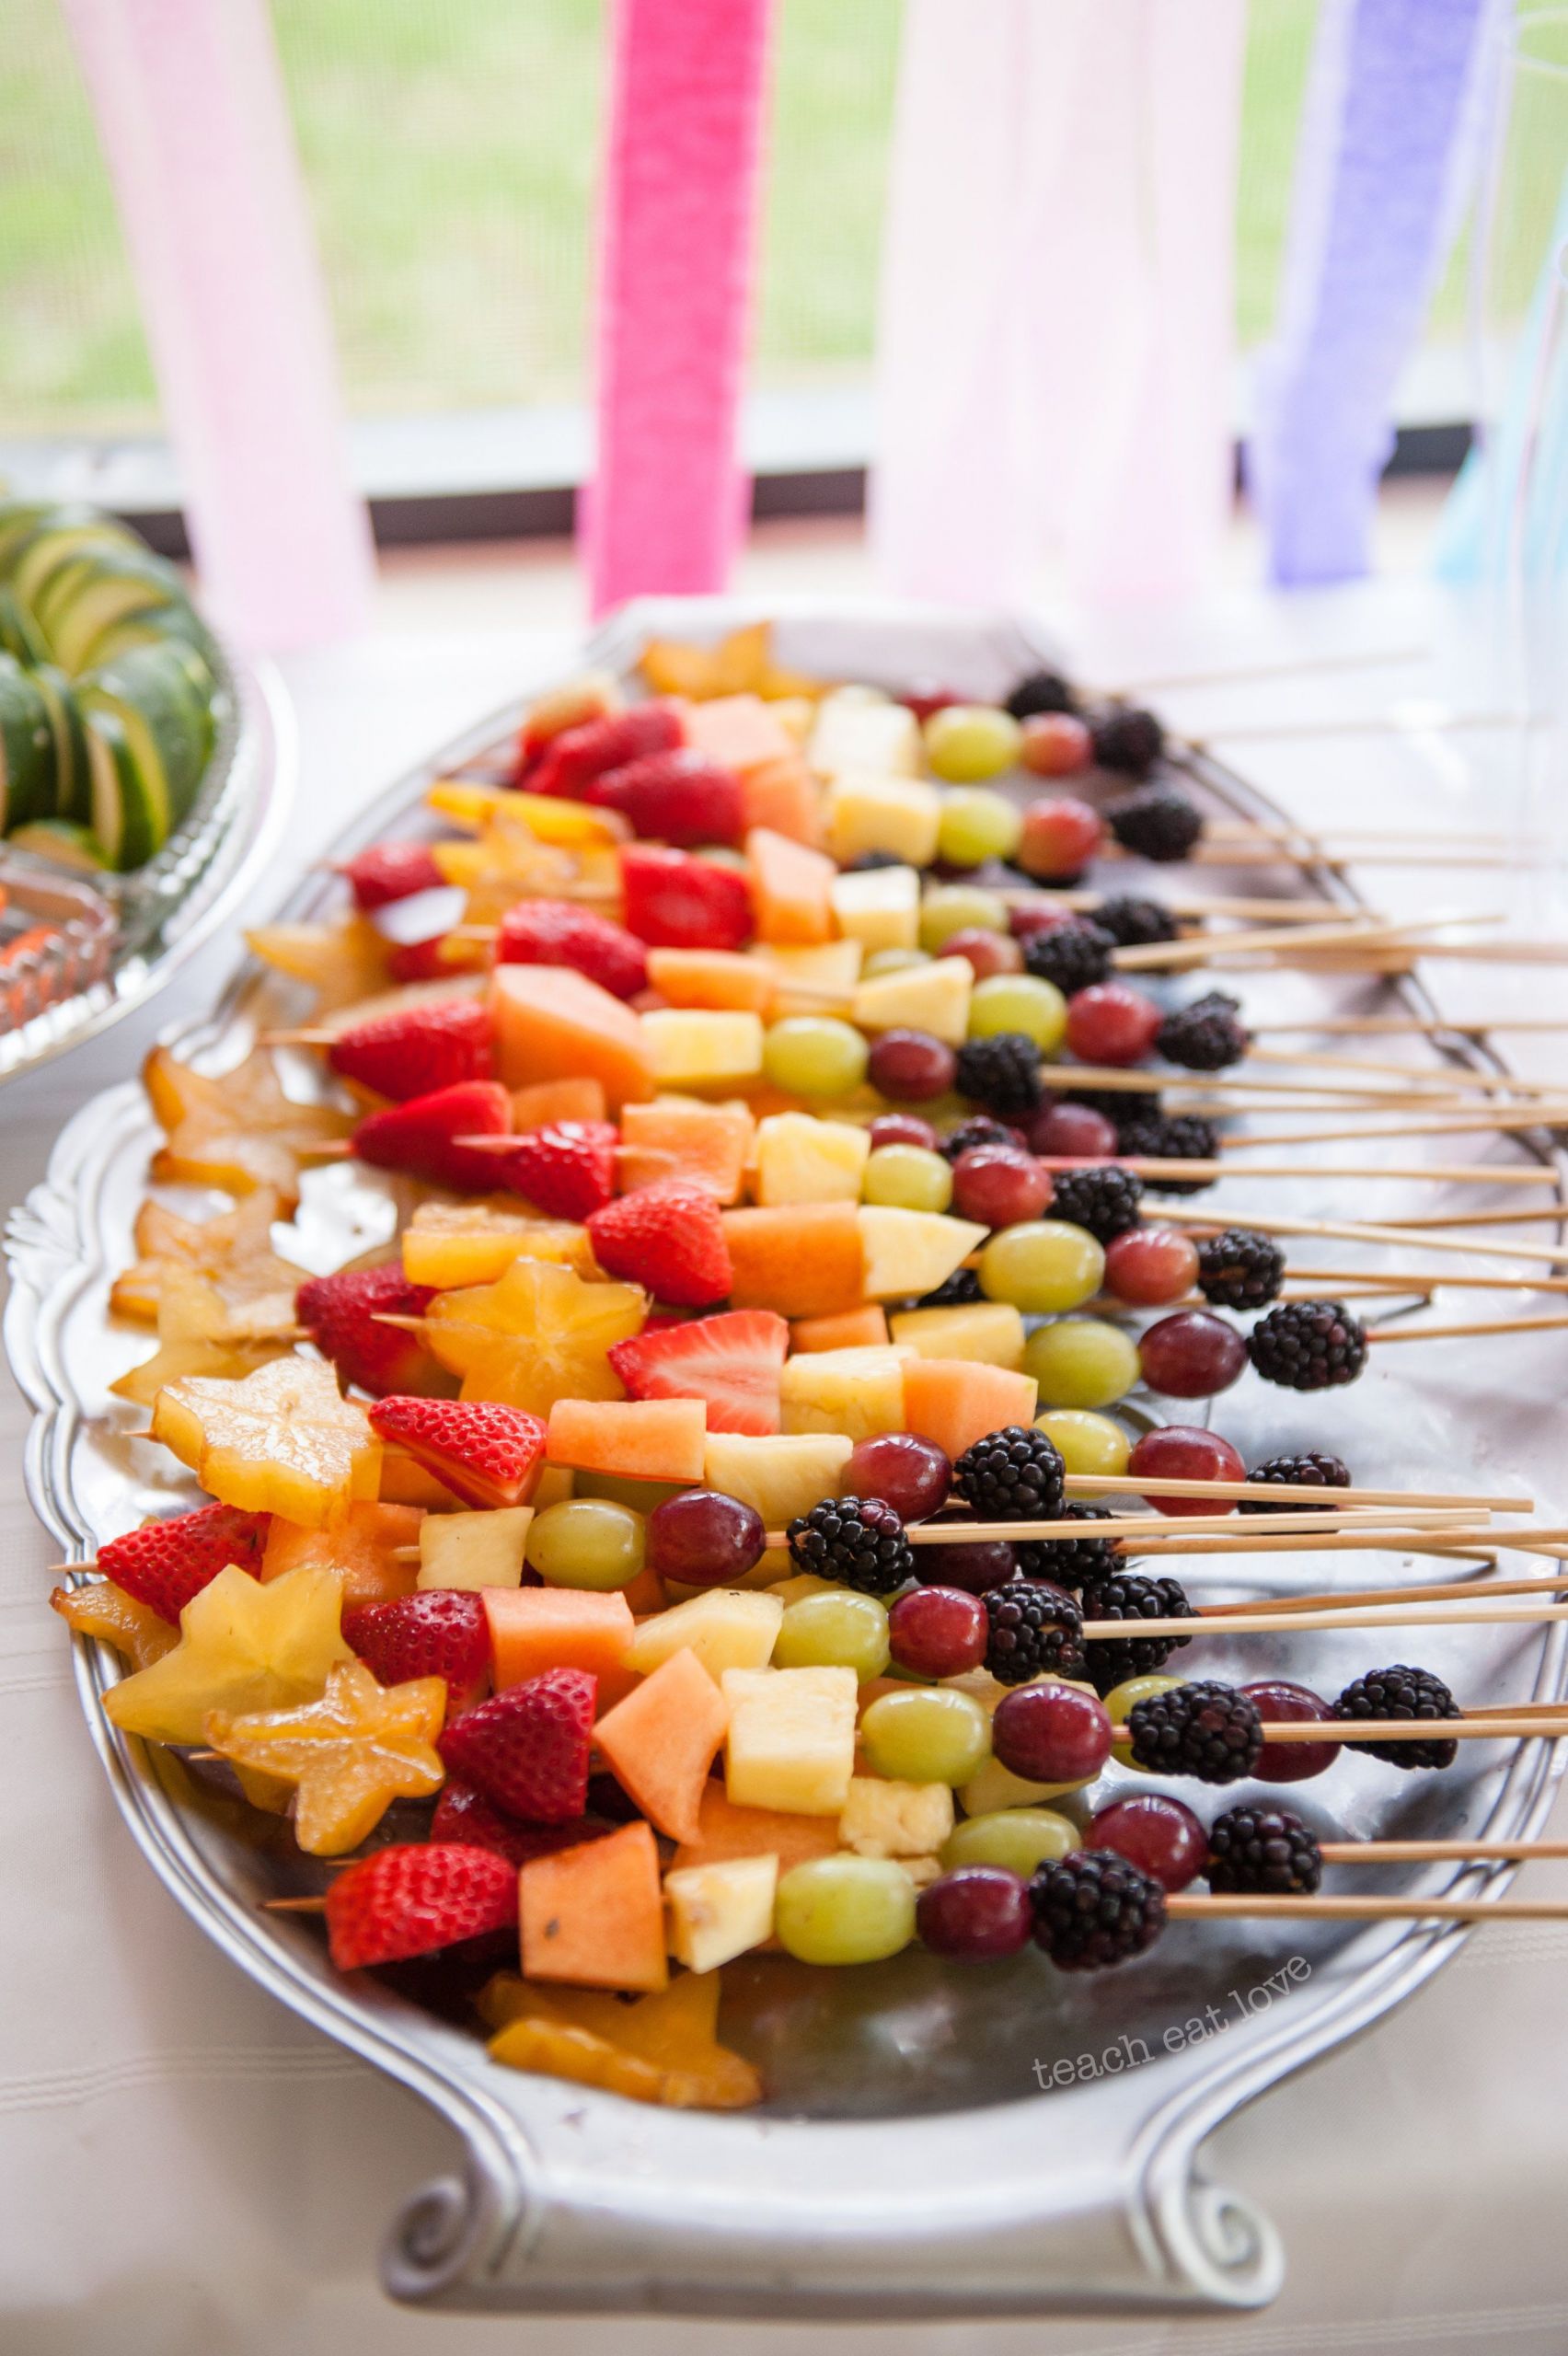 Girl Birthday Party Food Ideas
 Catering Ideas For Birthday Party